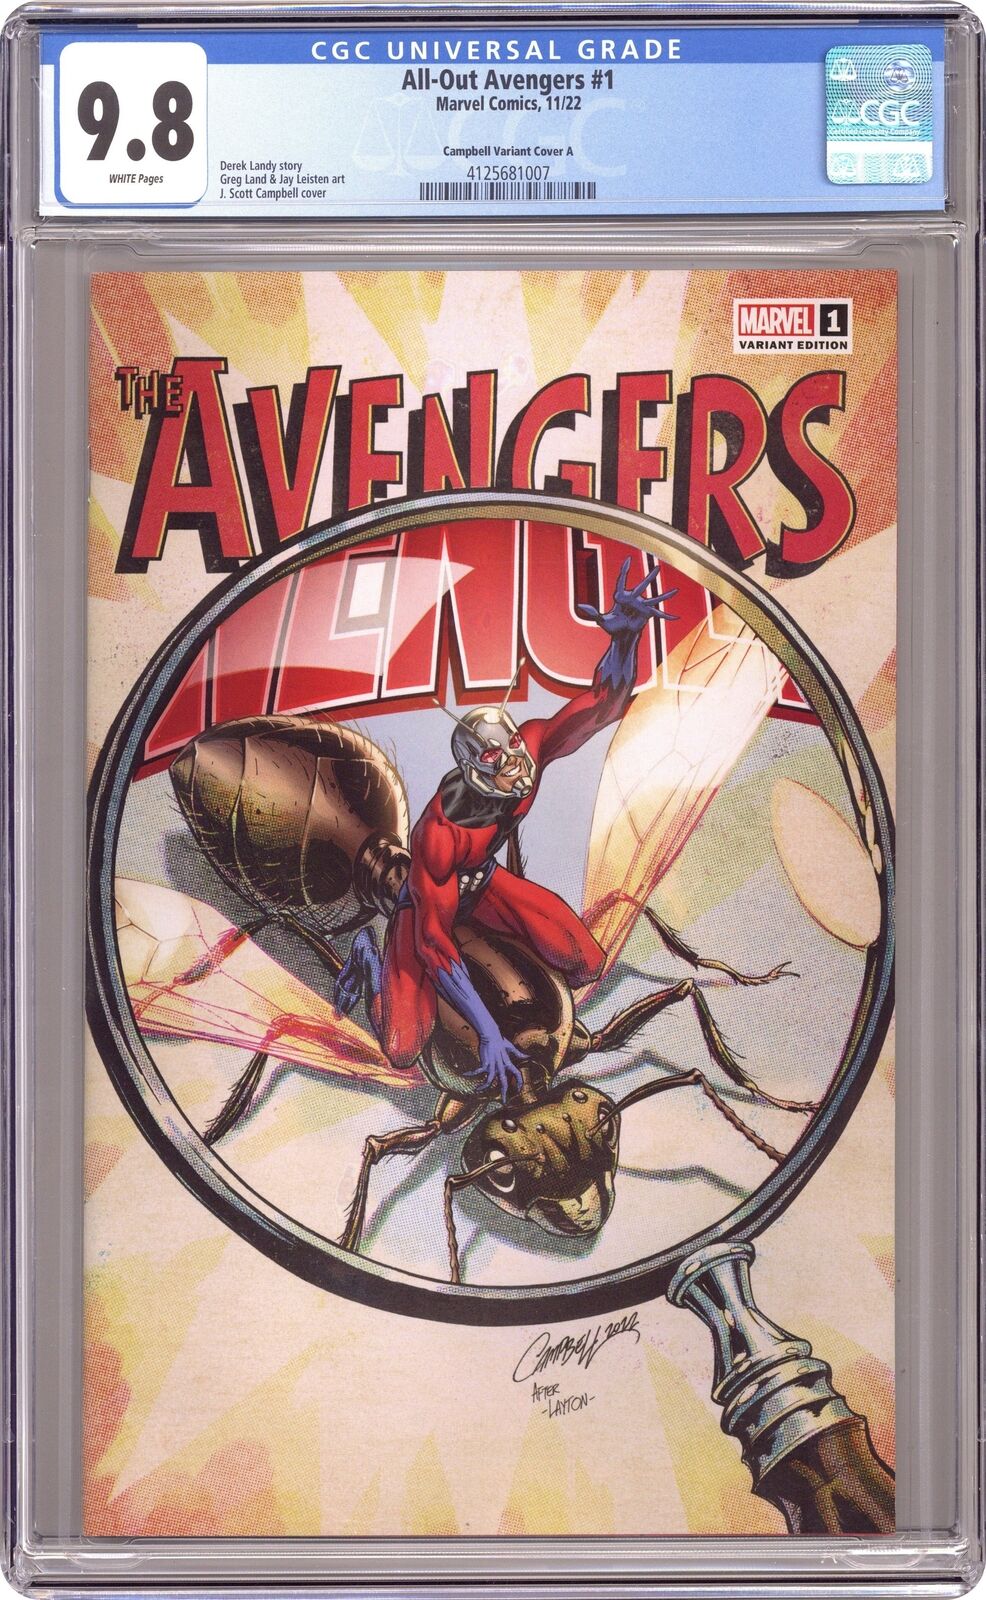 All-Out Avengers 1F Campbell Anniversary Variant CGC 9.8 2022 4125681007